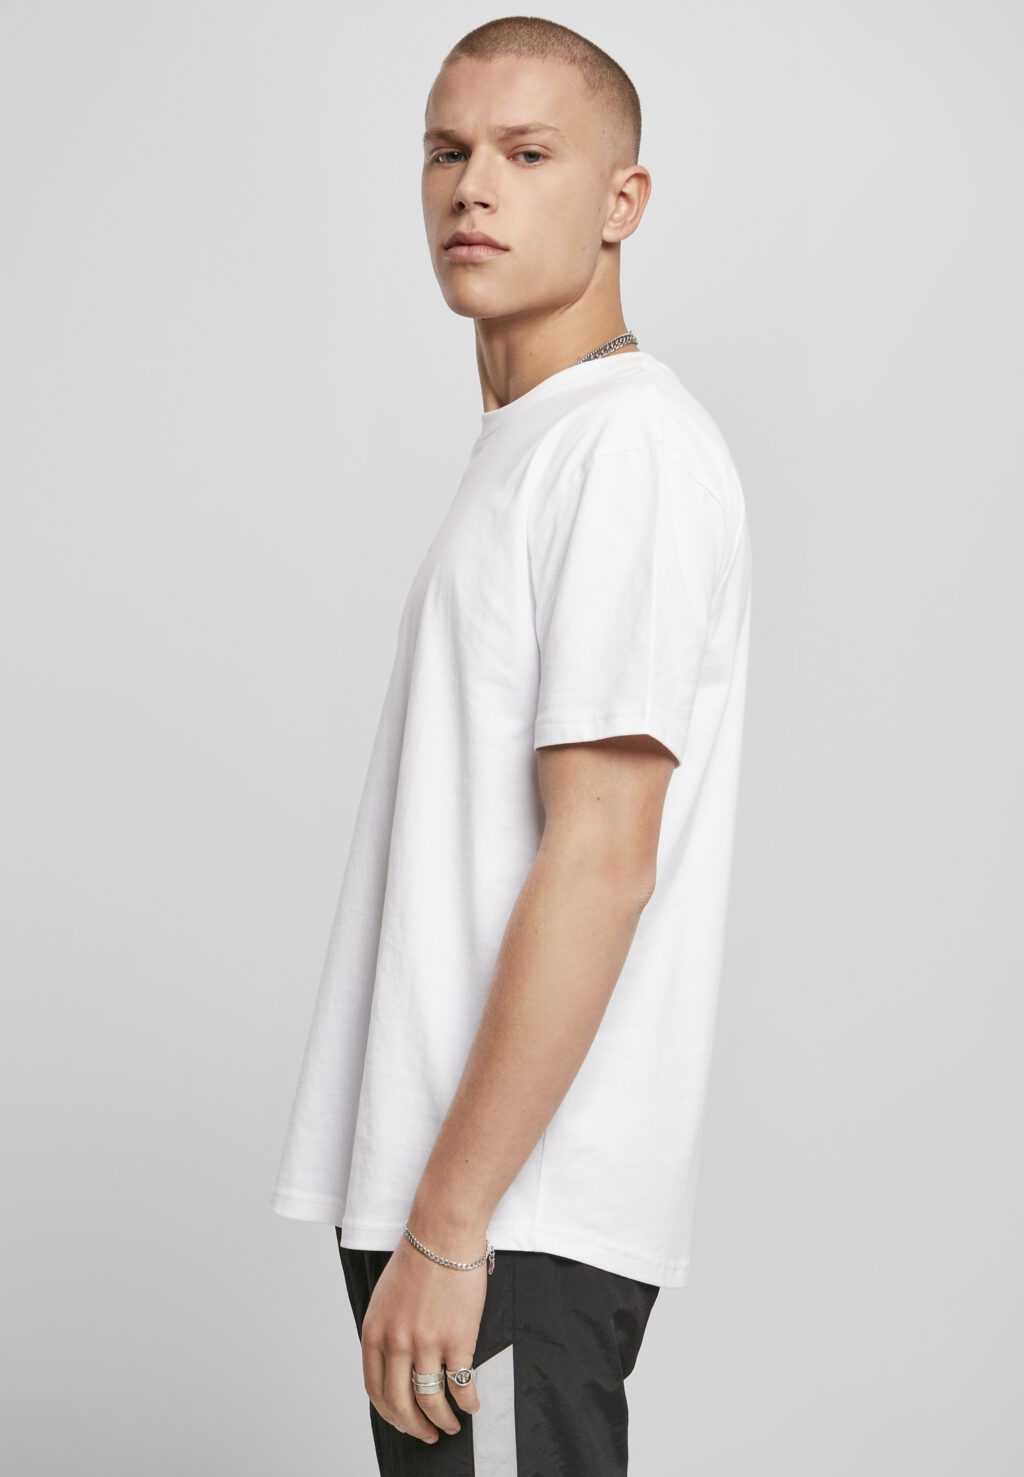 Urban Classics Organic Cotton Curved Oversized Tee 2-Pack white+white TB4394A